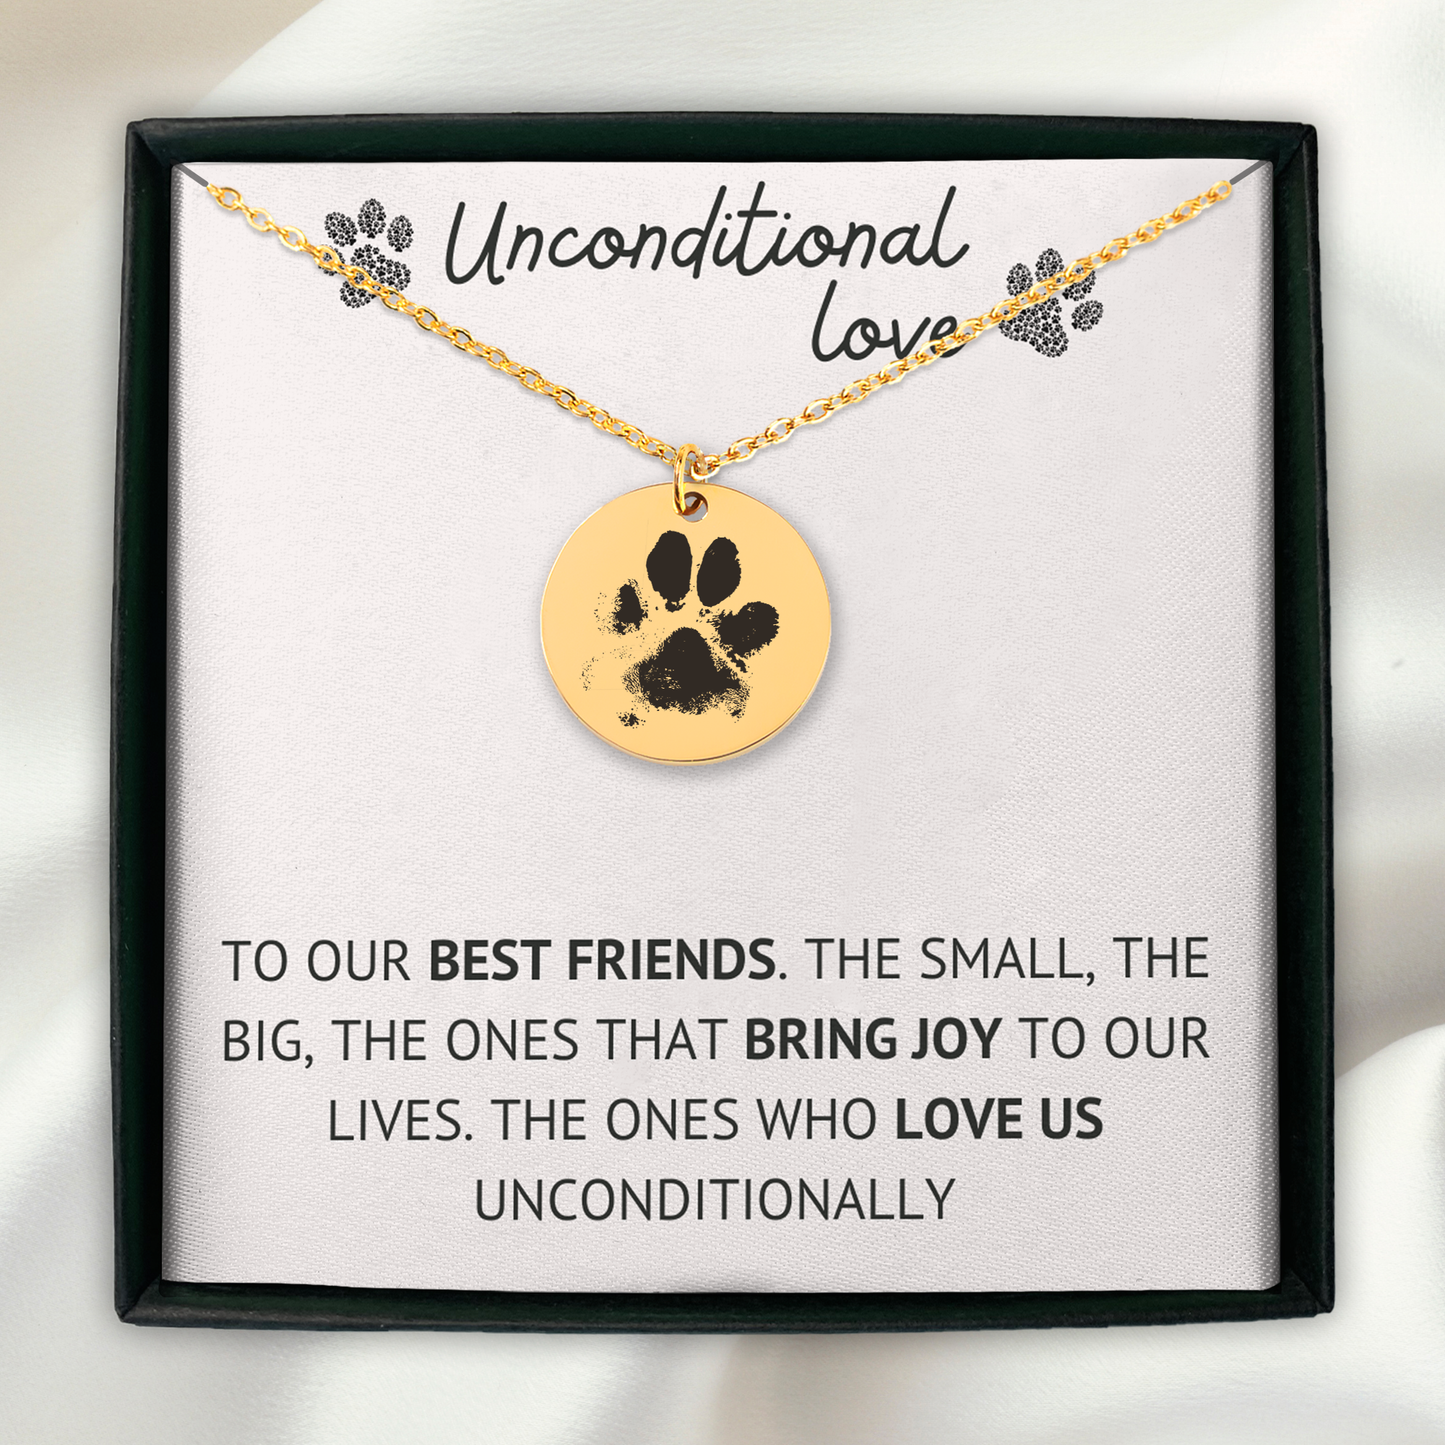 Personalized Necklace, Gifts for Dog Mom, Dog Dad, Cat Mom, Cat Dad, Grandpa, Grandma, Gift for Pet Owner, Actual Paw Print Necklace